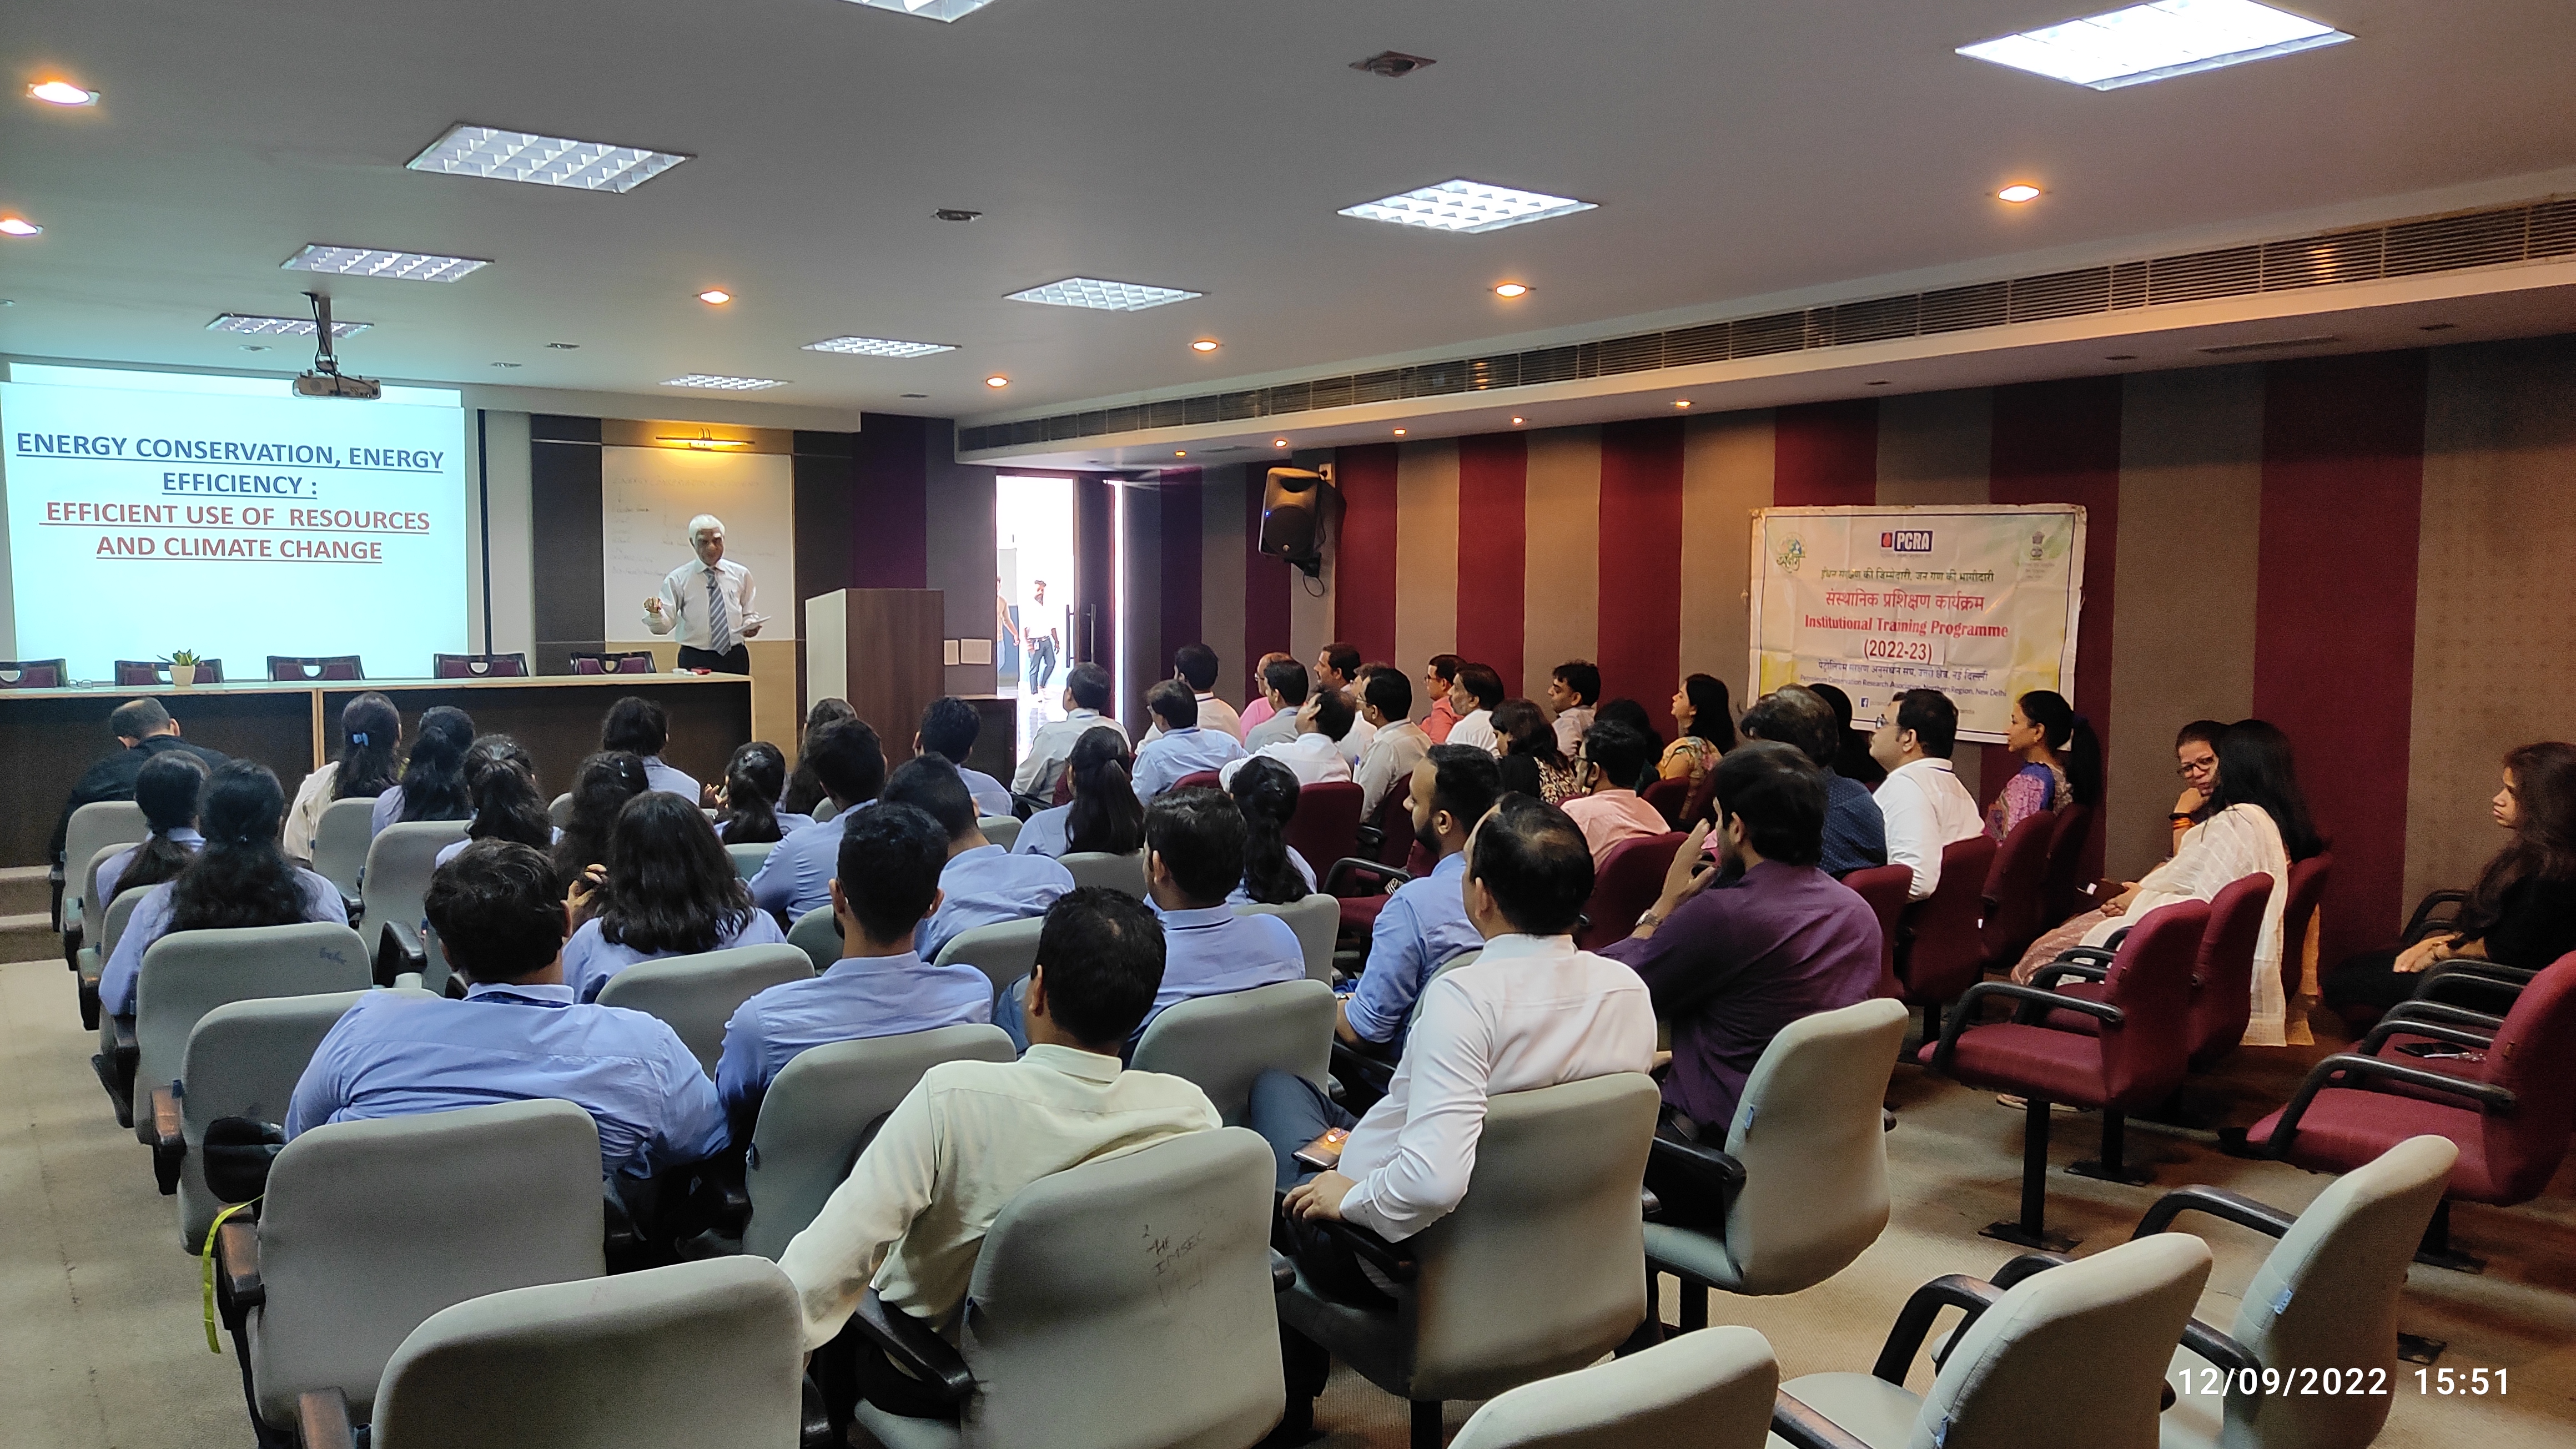 IMS Engineering College have organized a seminar on Energy conservation